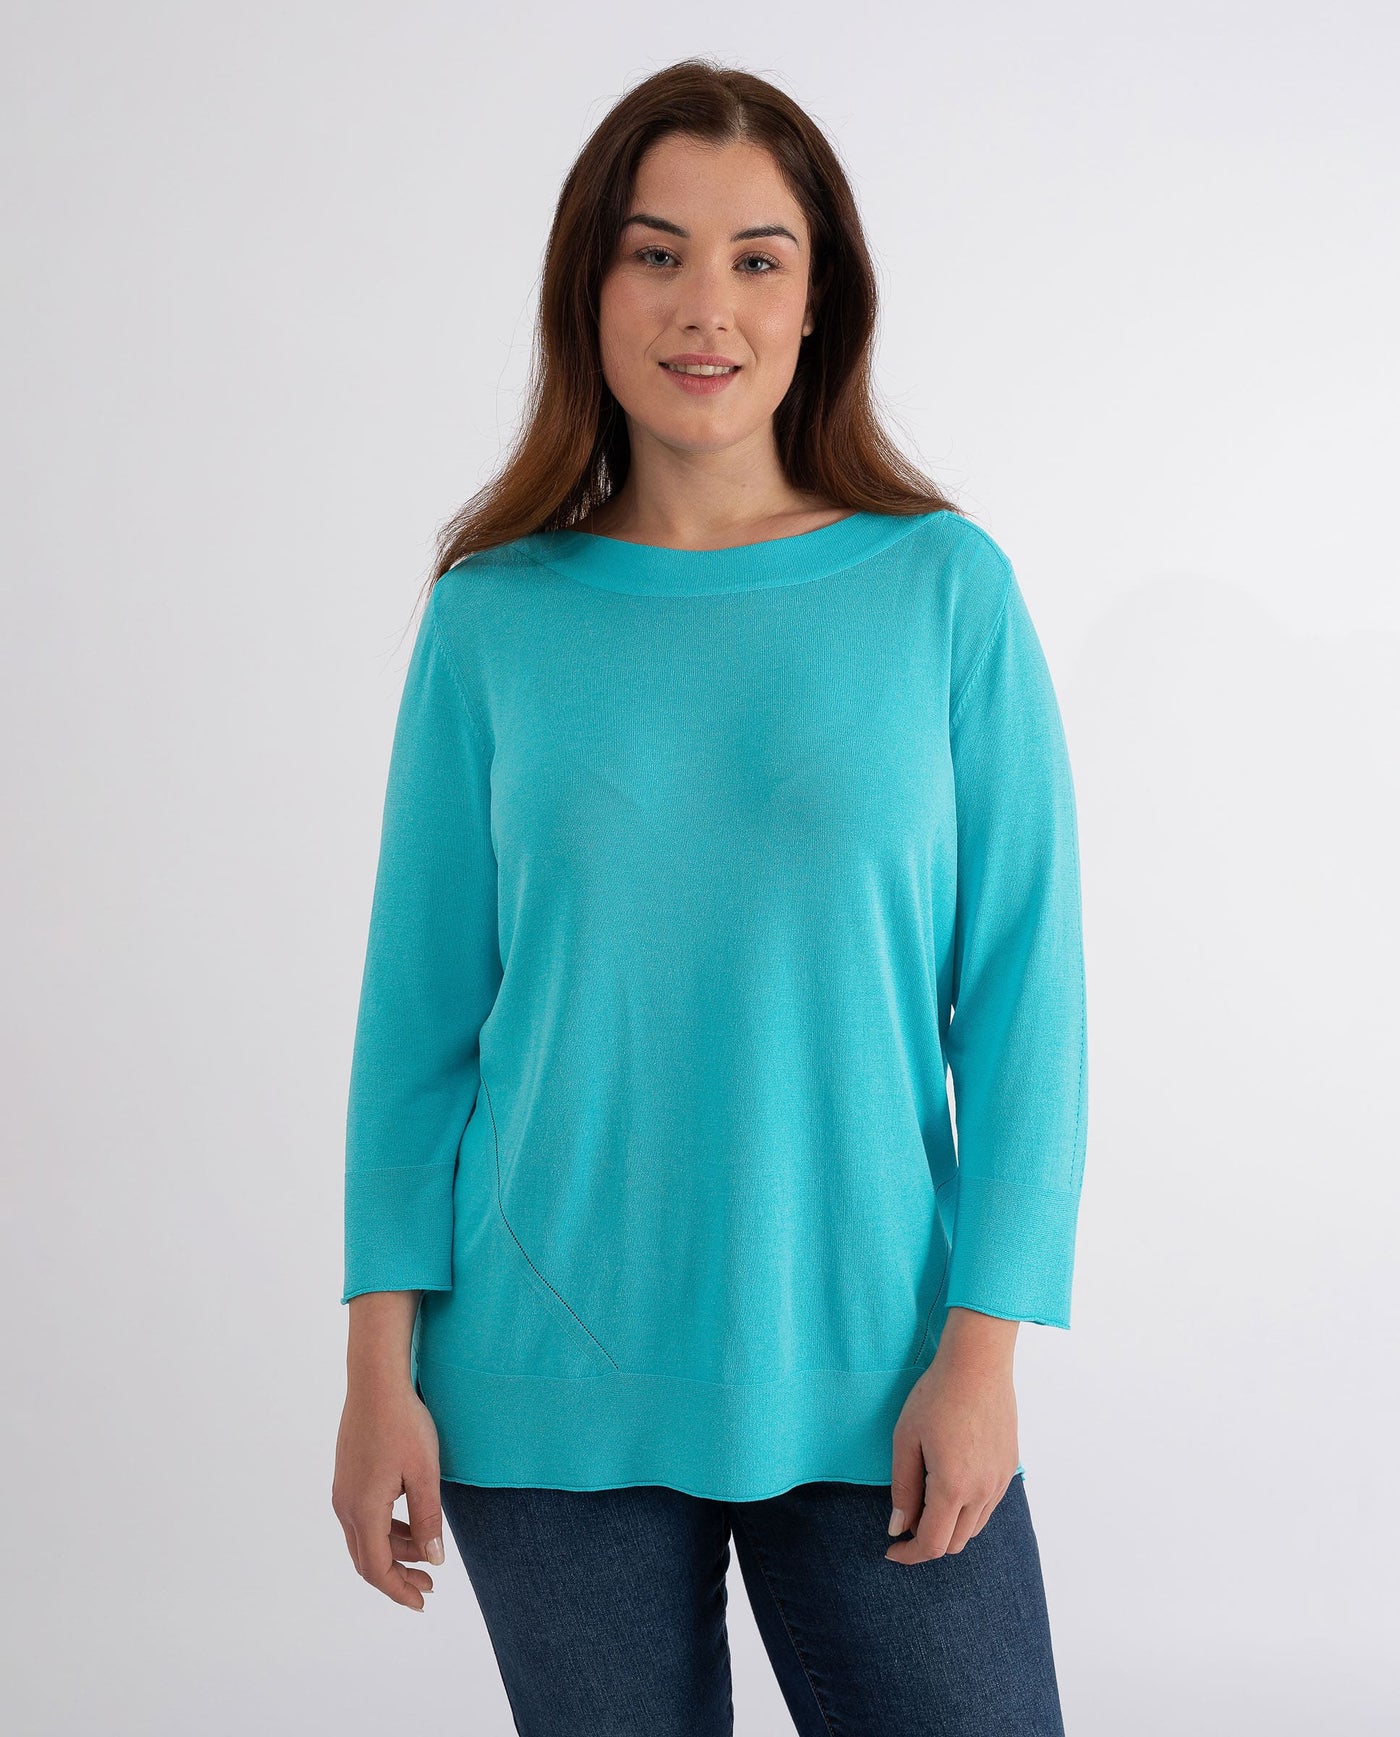 TURQUOISE BOAT NECK SWEATER